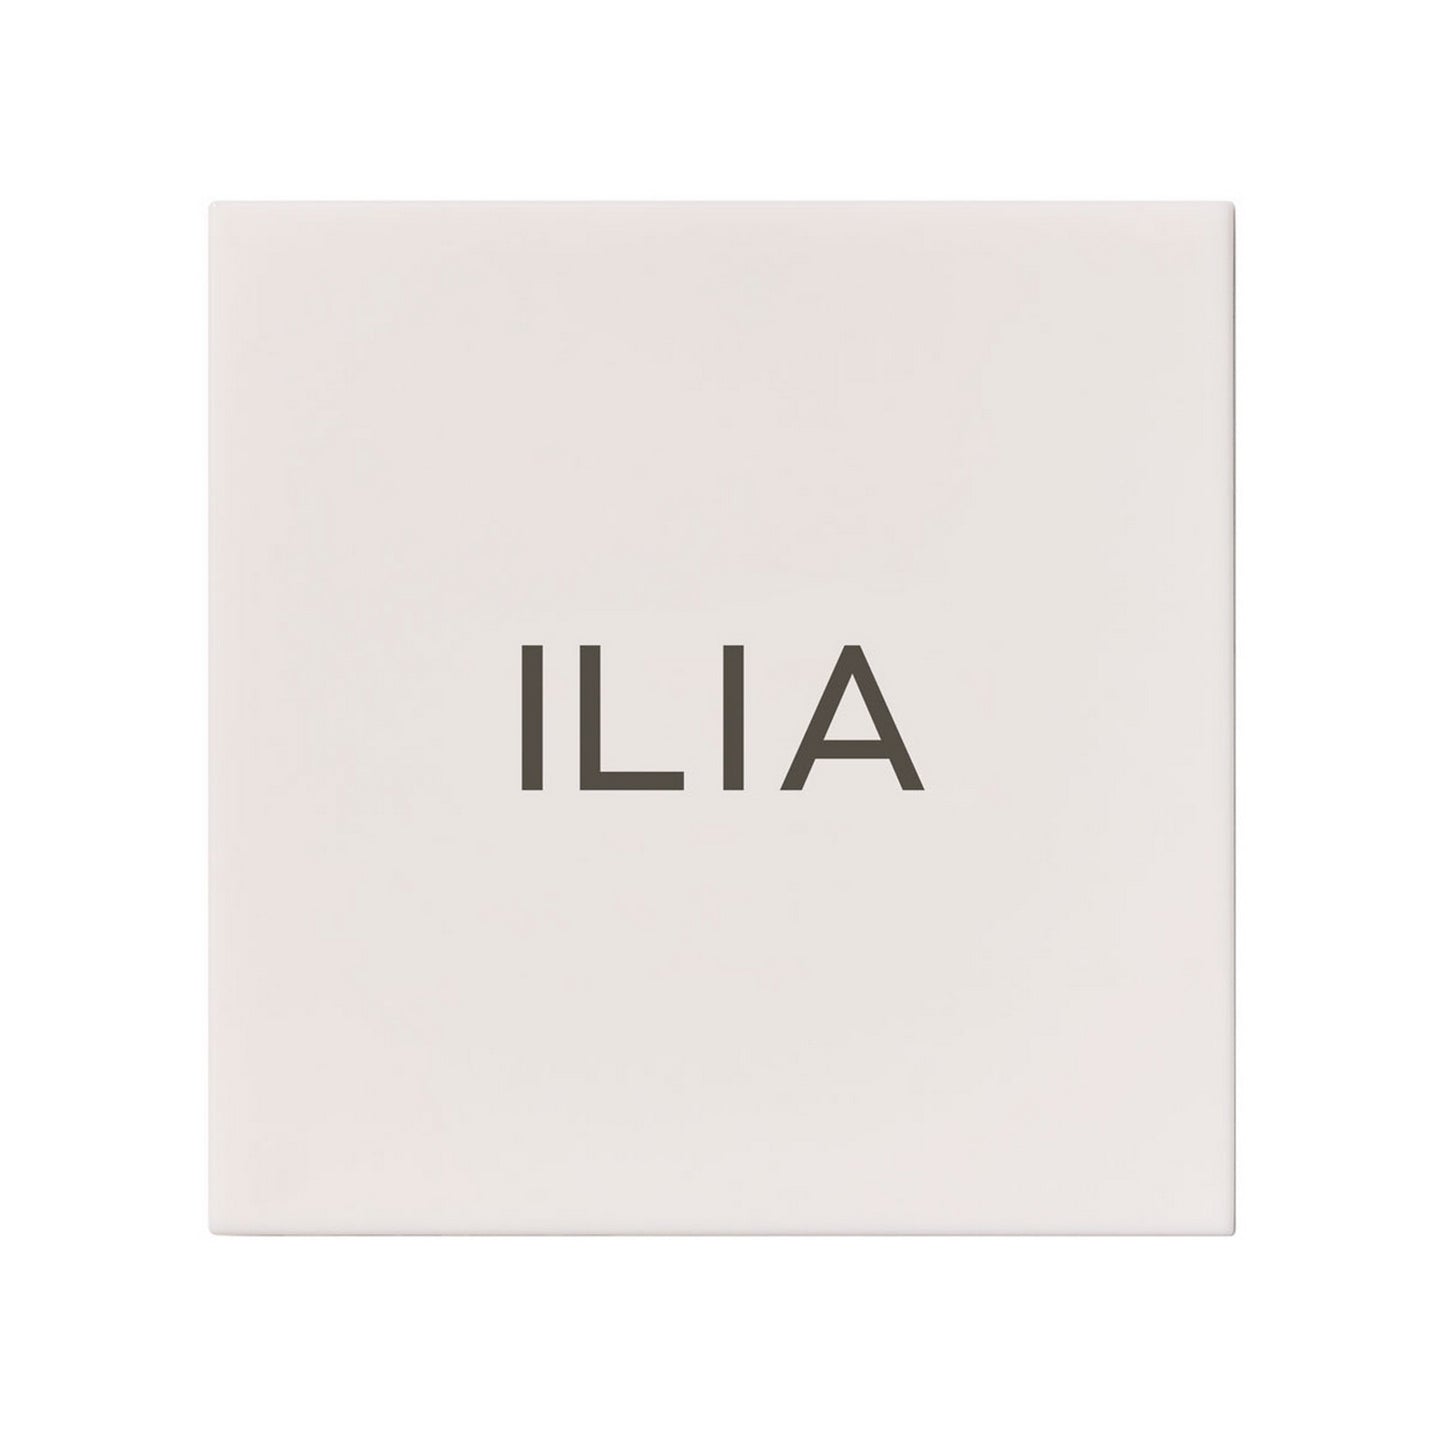 ILIA THE NECESSARY EYESHADOW PALETTE - COOL NUDE